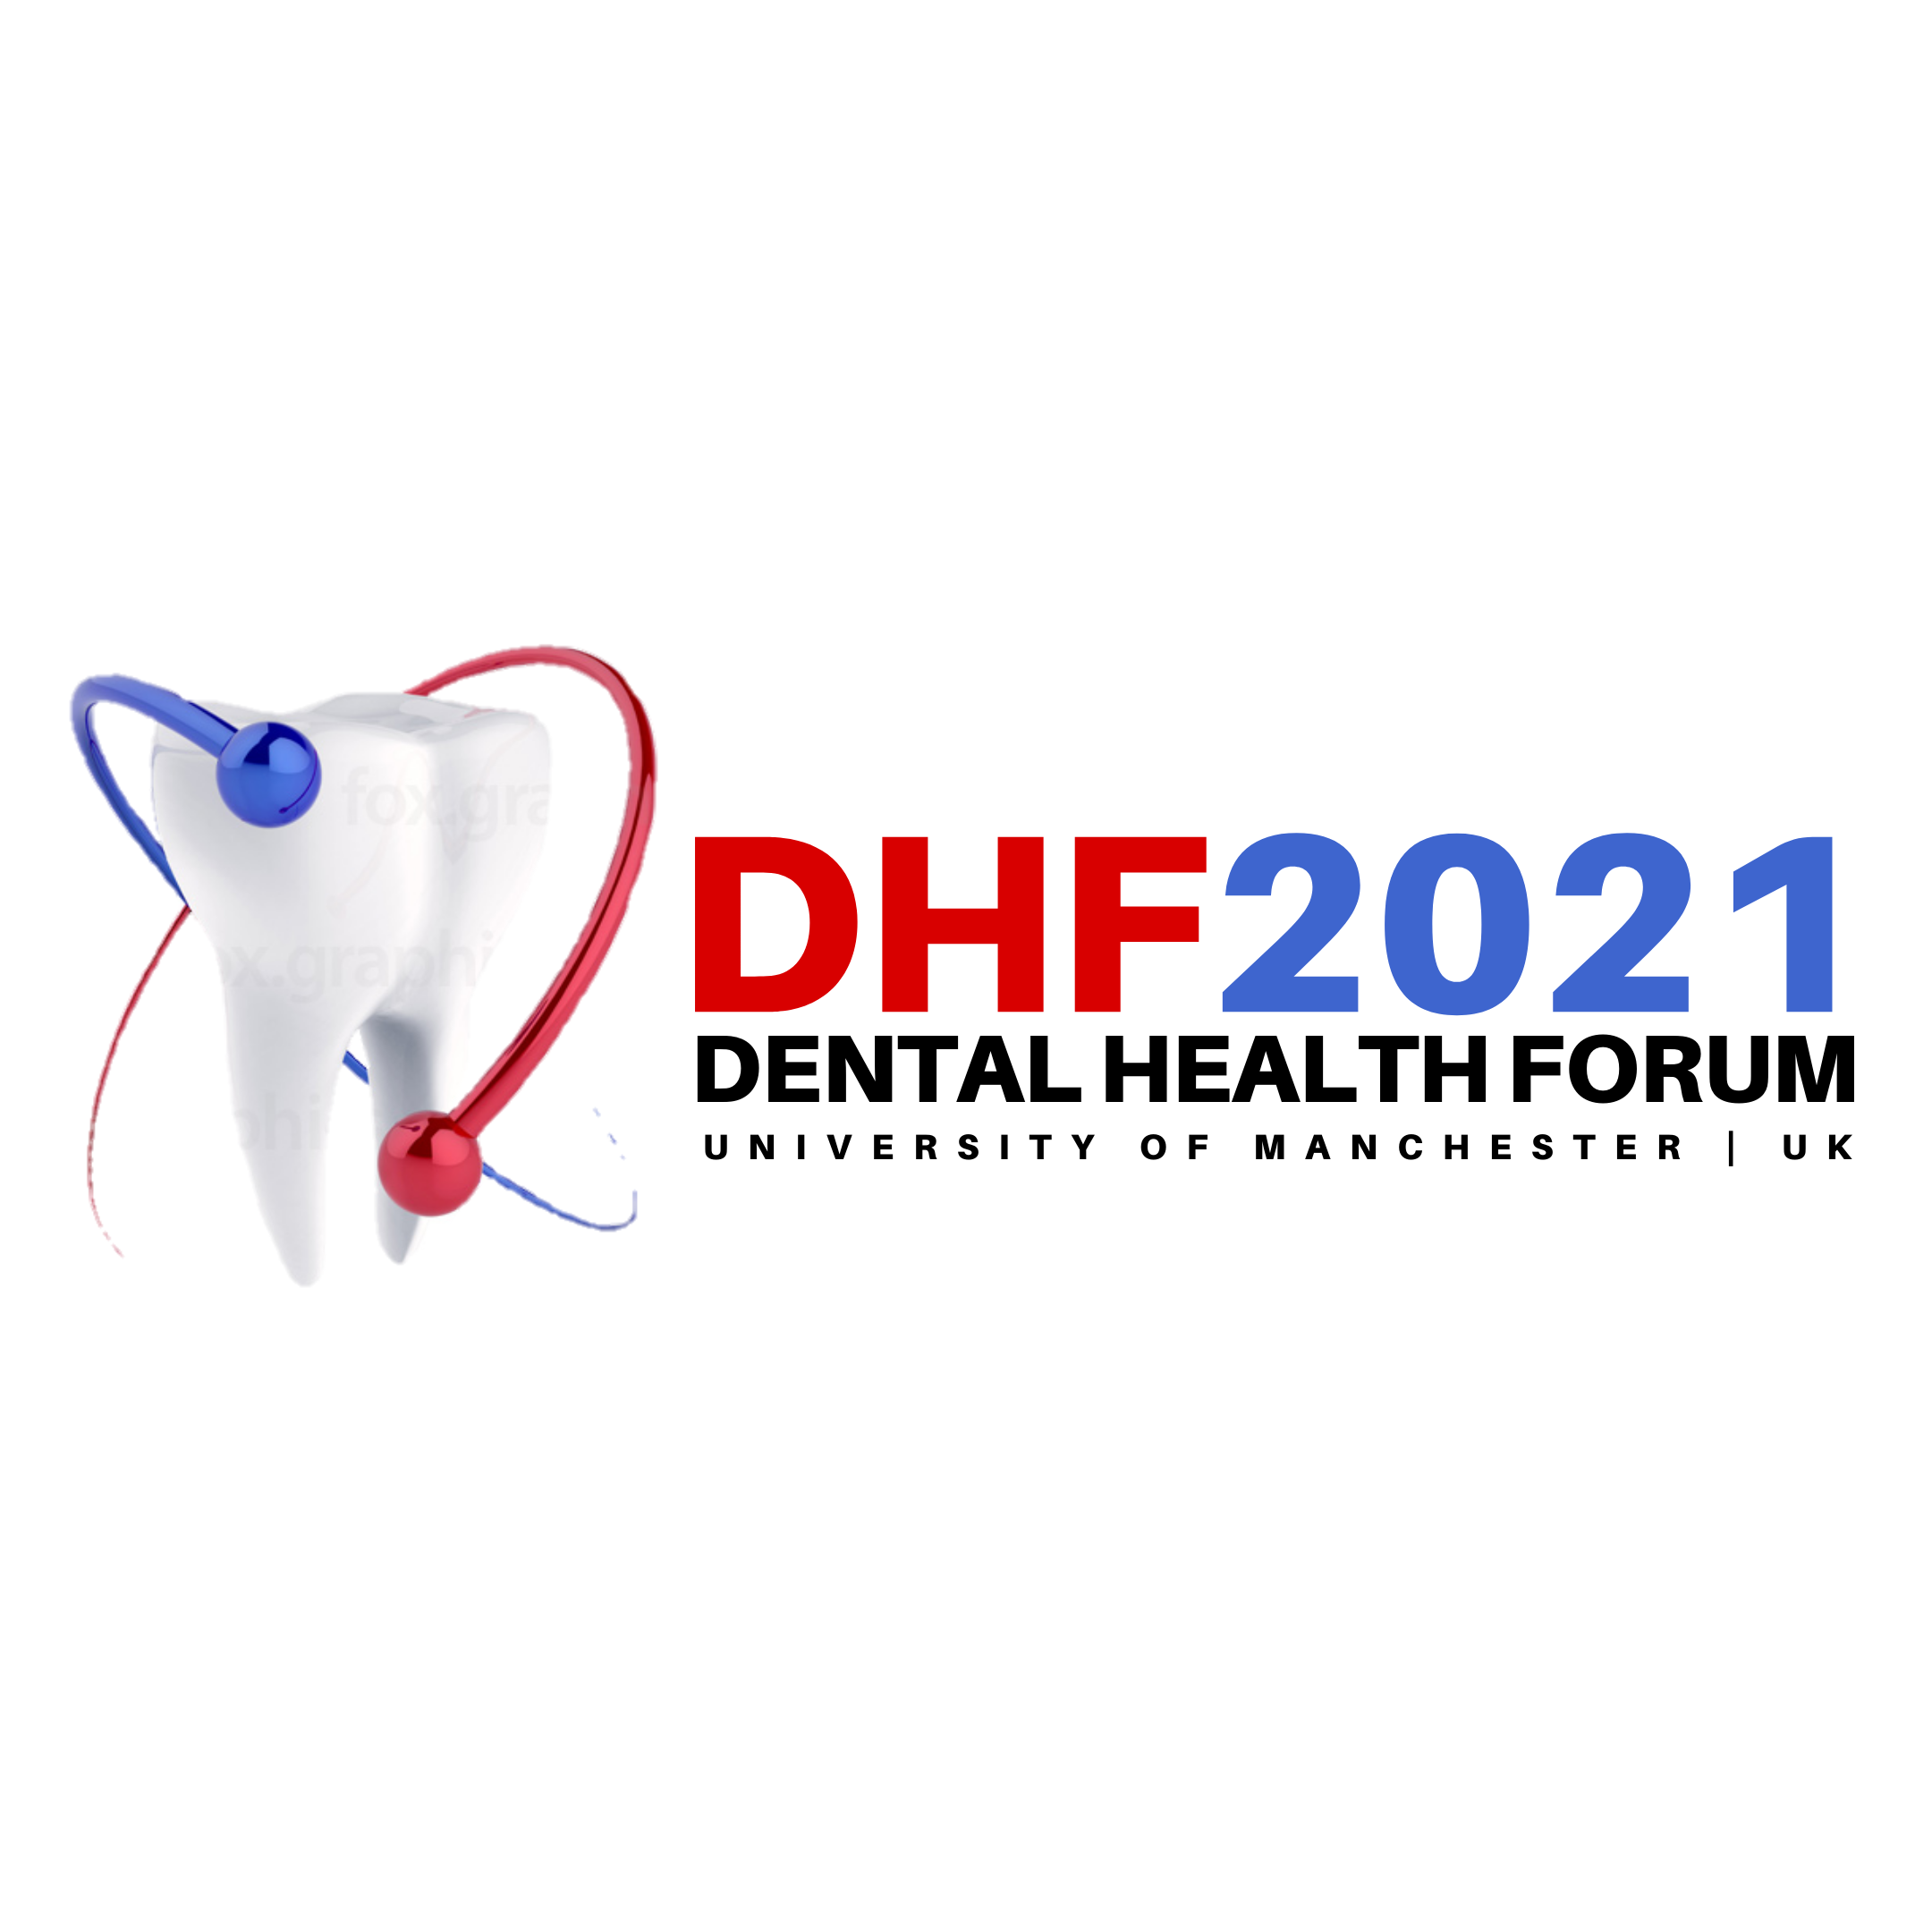 Dental Health Forum, United Research Forum, 1-75 Shelton Street Covent,Greater Manchester,United Kingdom